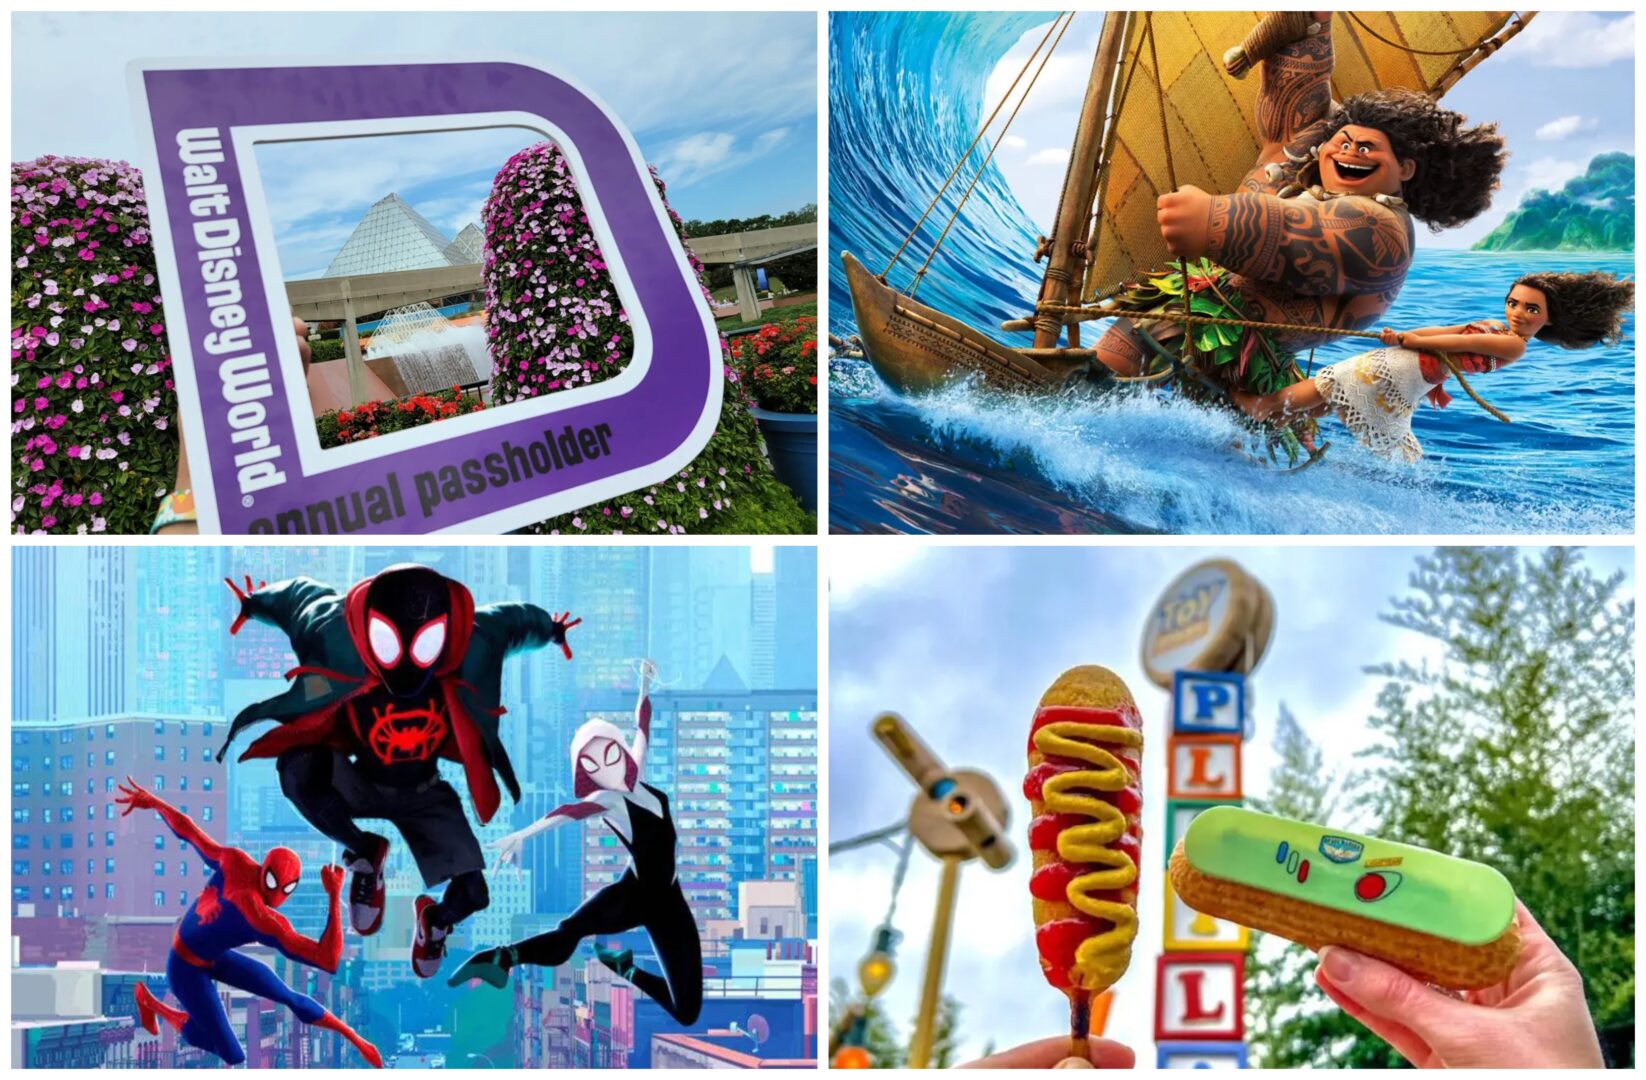 Here are the Top 10 Disney News Stories from Chip and Company for June 3rd, 2023